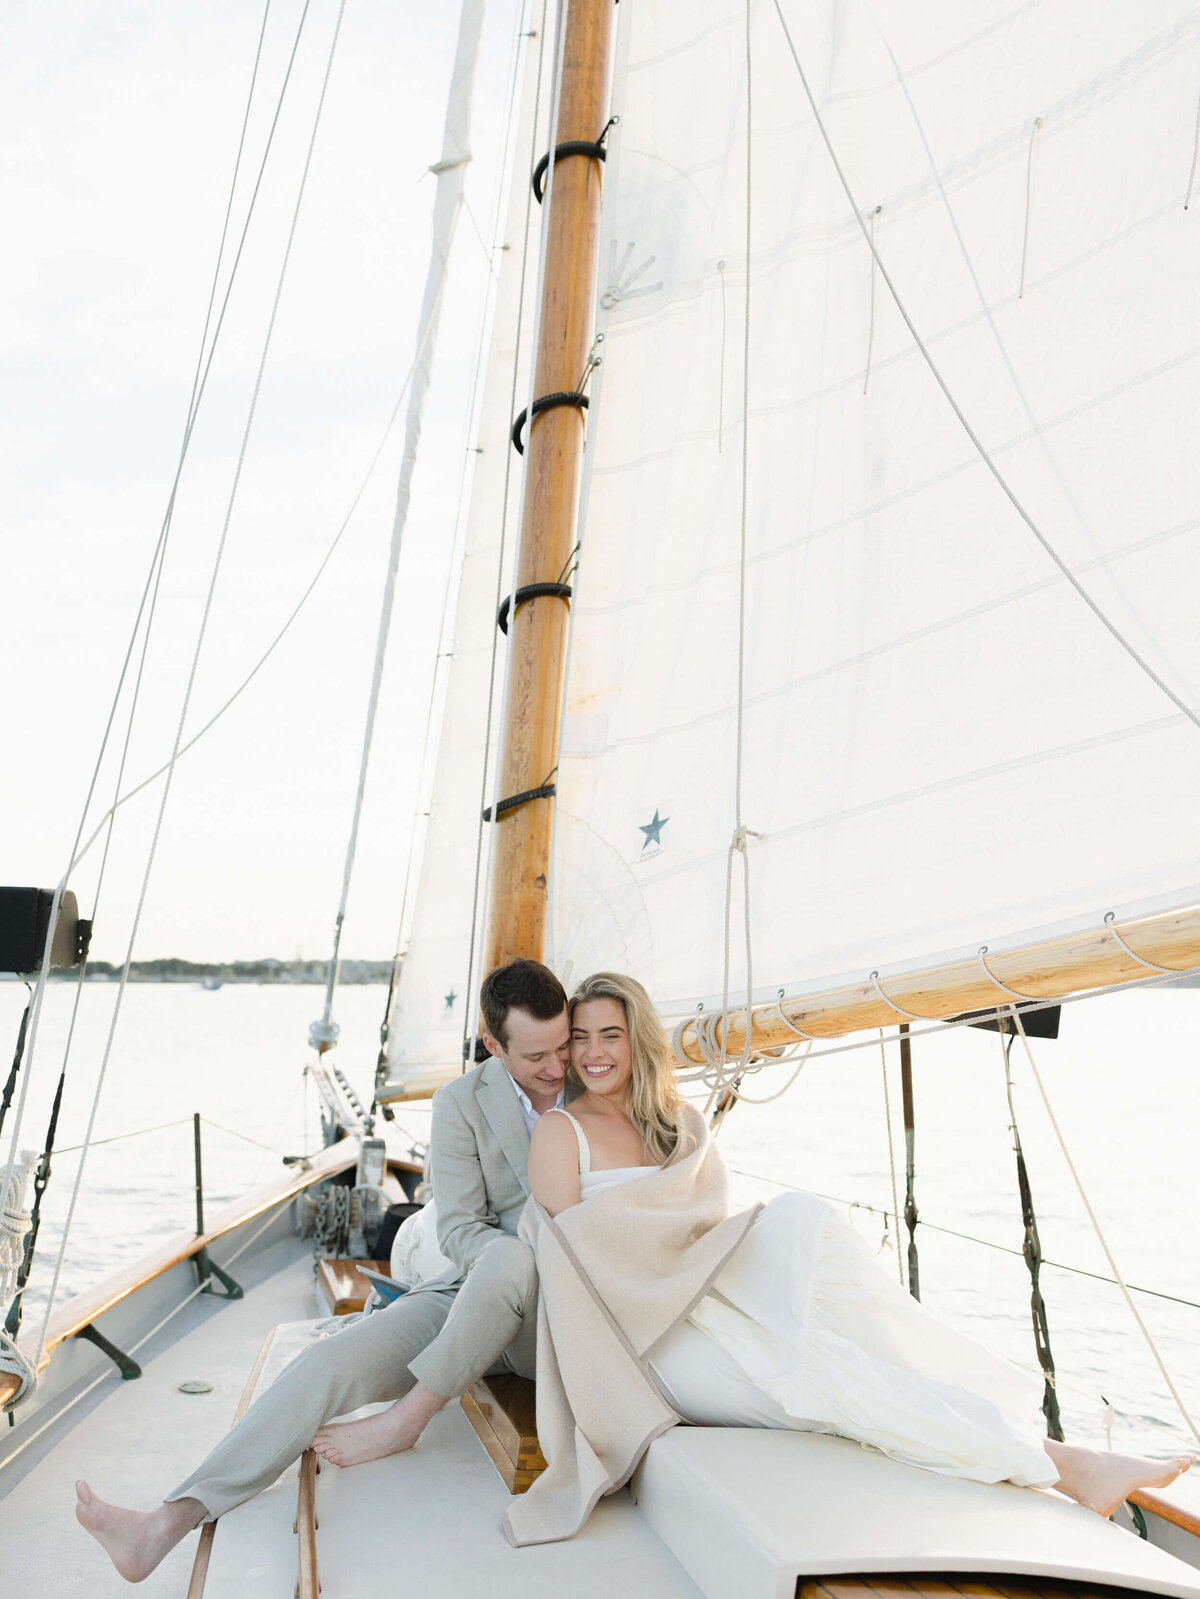 42-KT-Merry-photography-maine-engagement